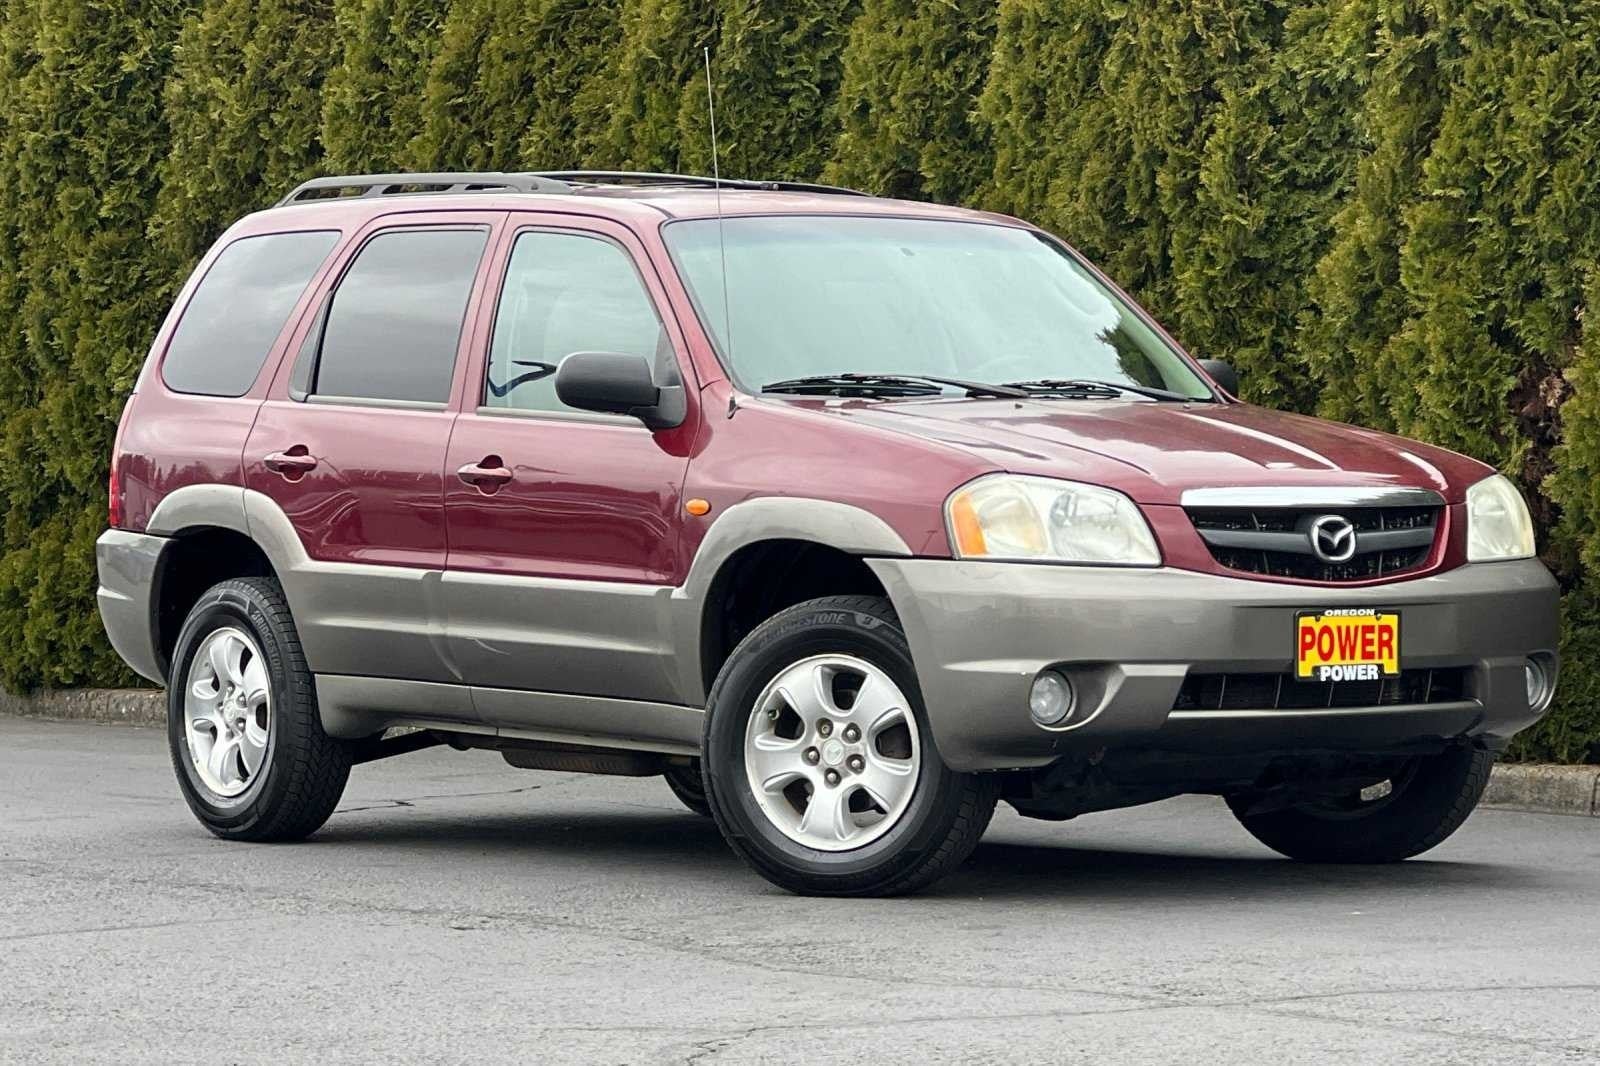 Used 2003 Mazda Tribute LX with VIN 4F2YZ94163KM07233 for sale in Newport, OR